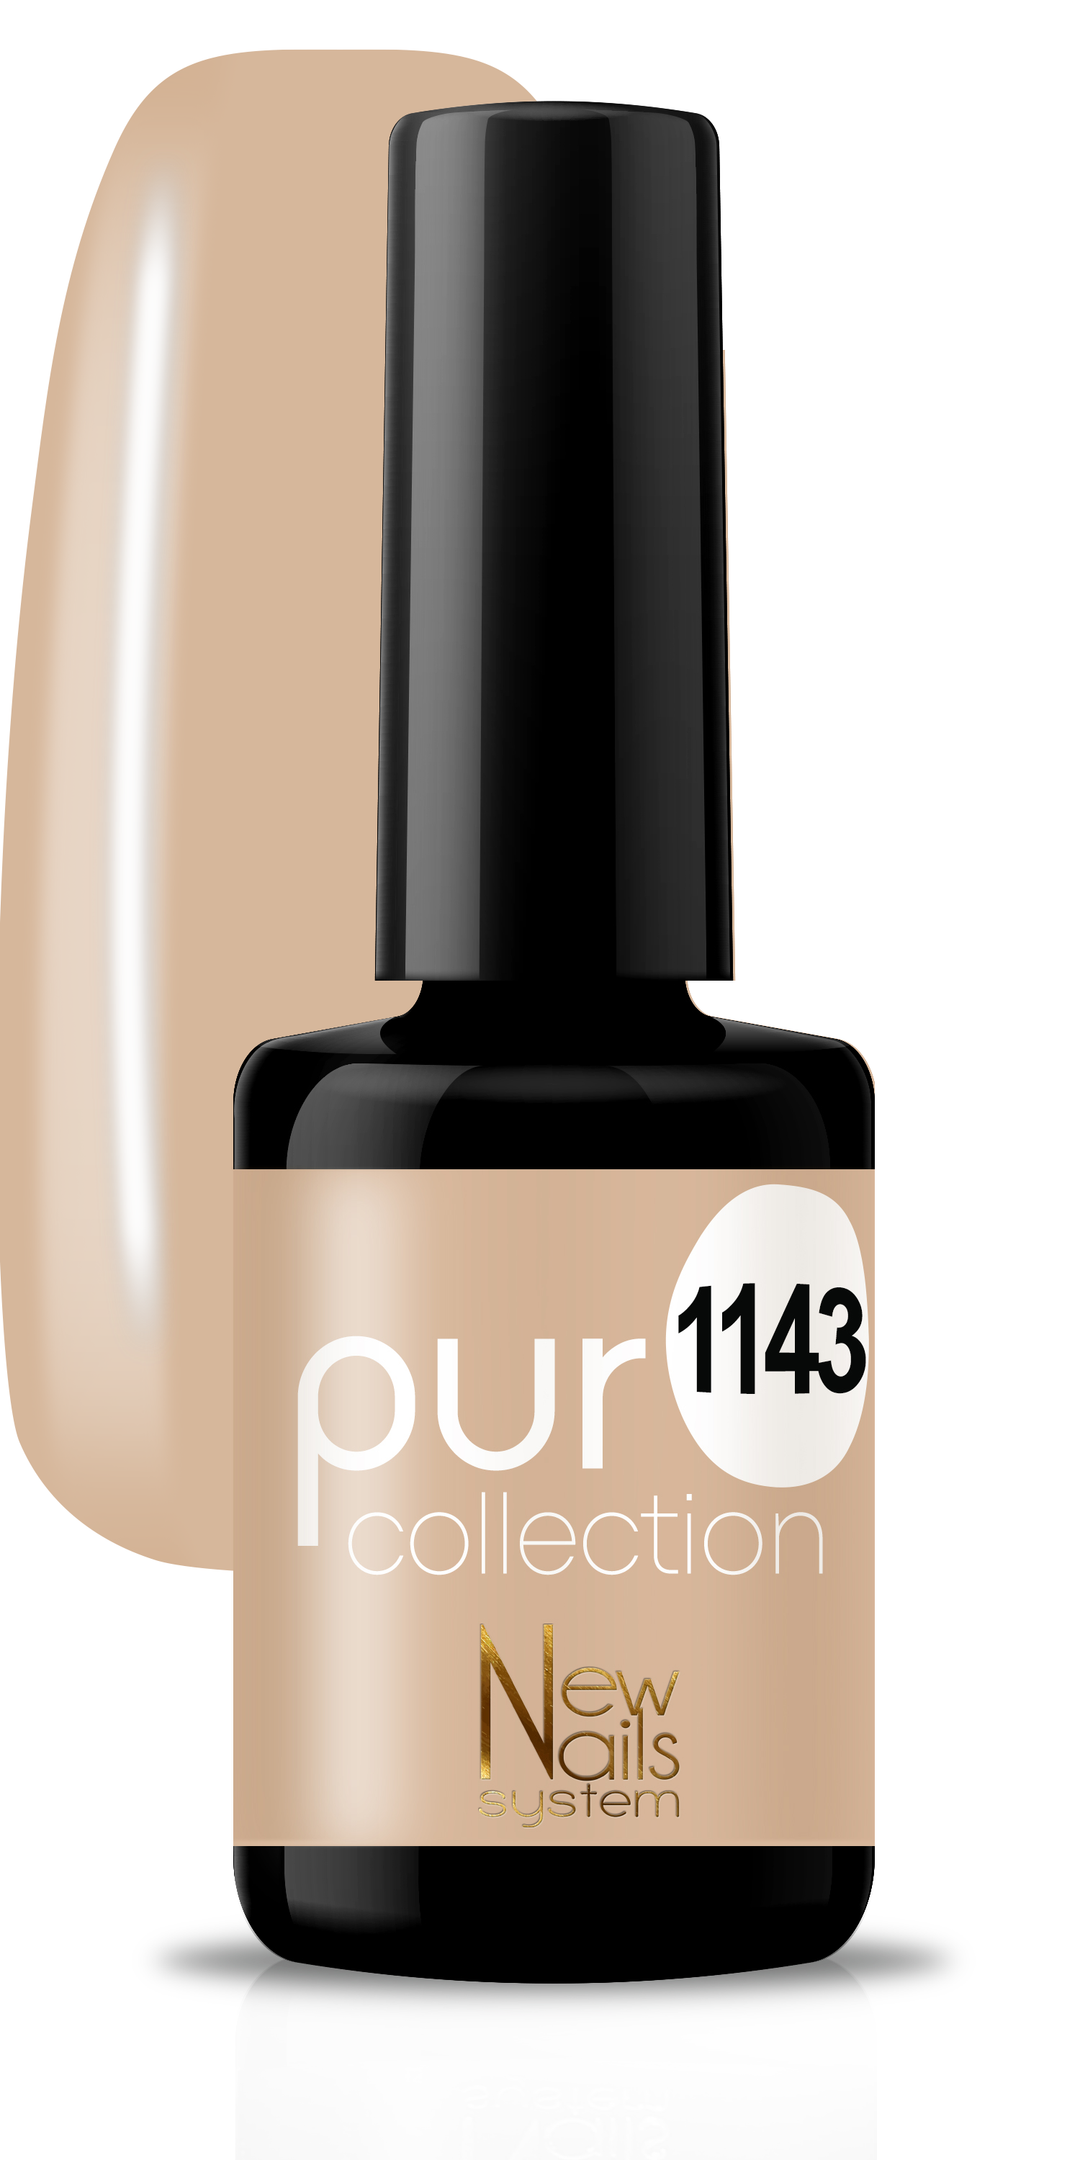 Puro collection Scent of Roses 1143 polish gel color 5ml